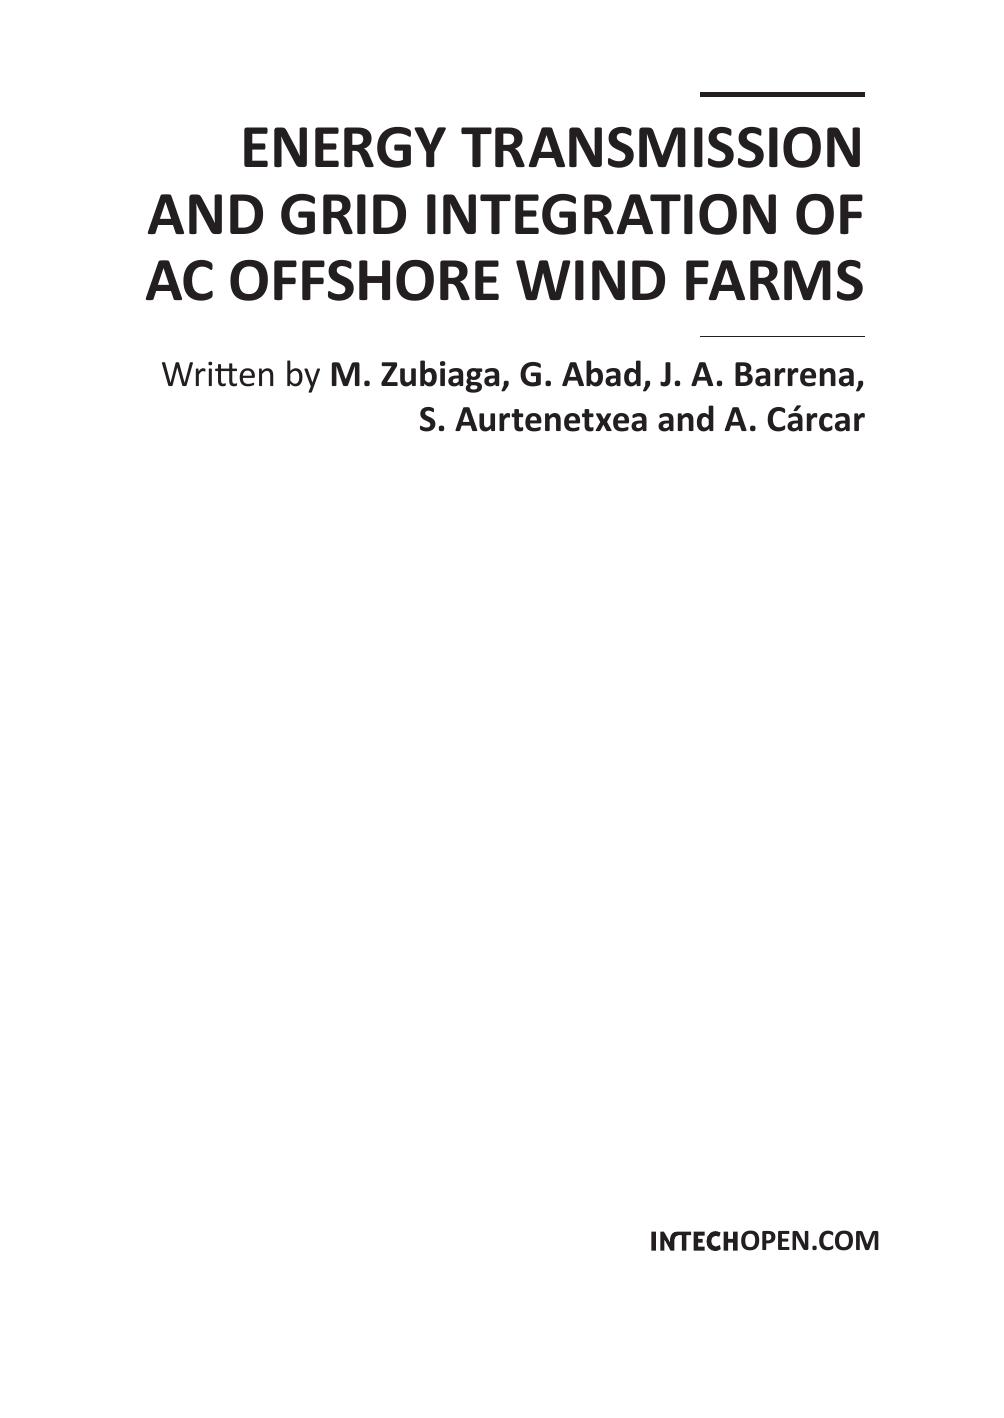 Energy Transmission and Grid Integration of AC Offshore Wind Farms 2012.pdf